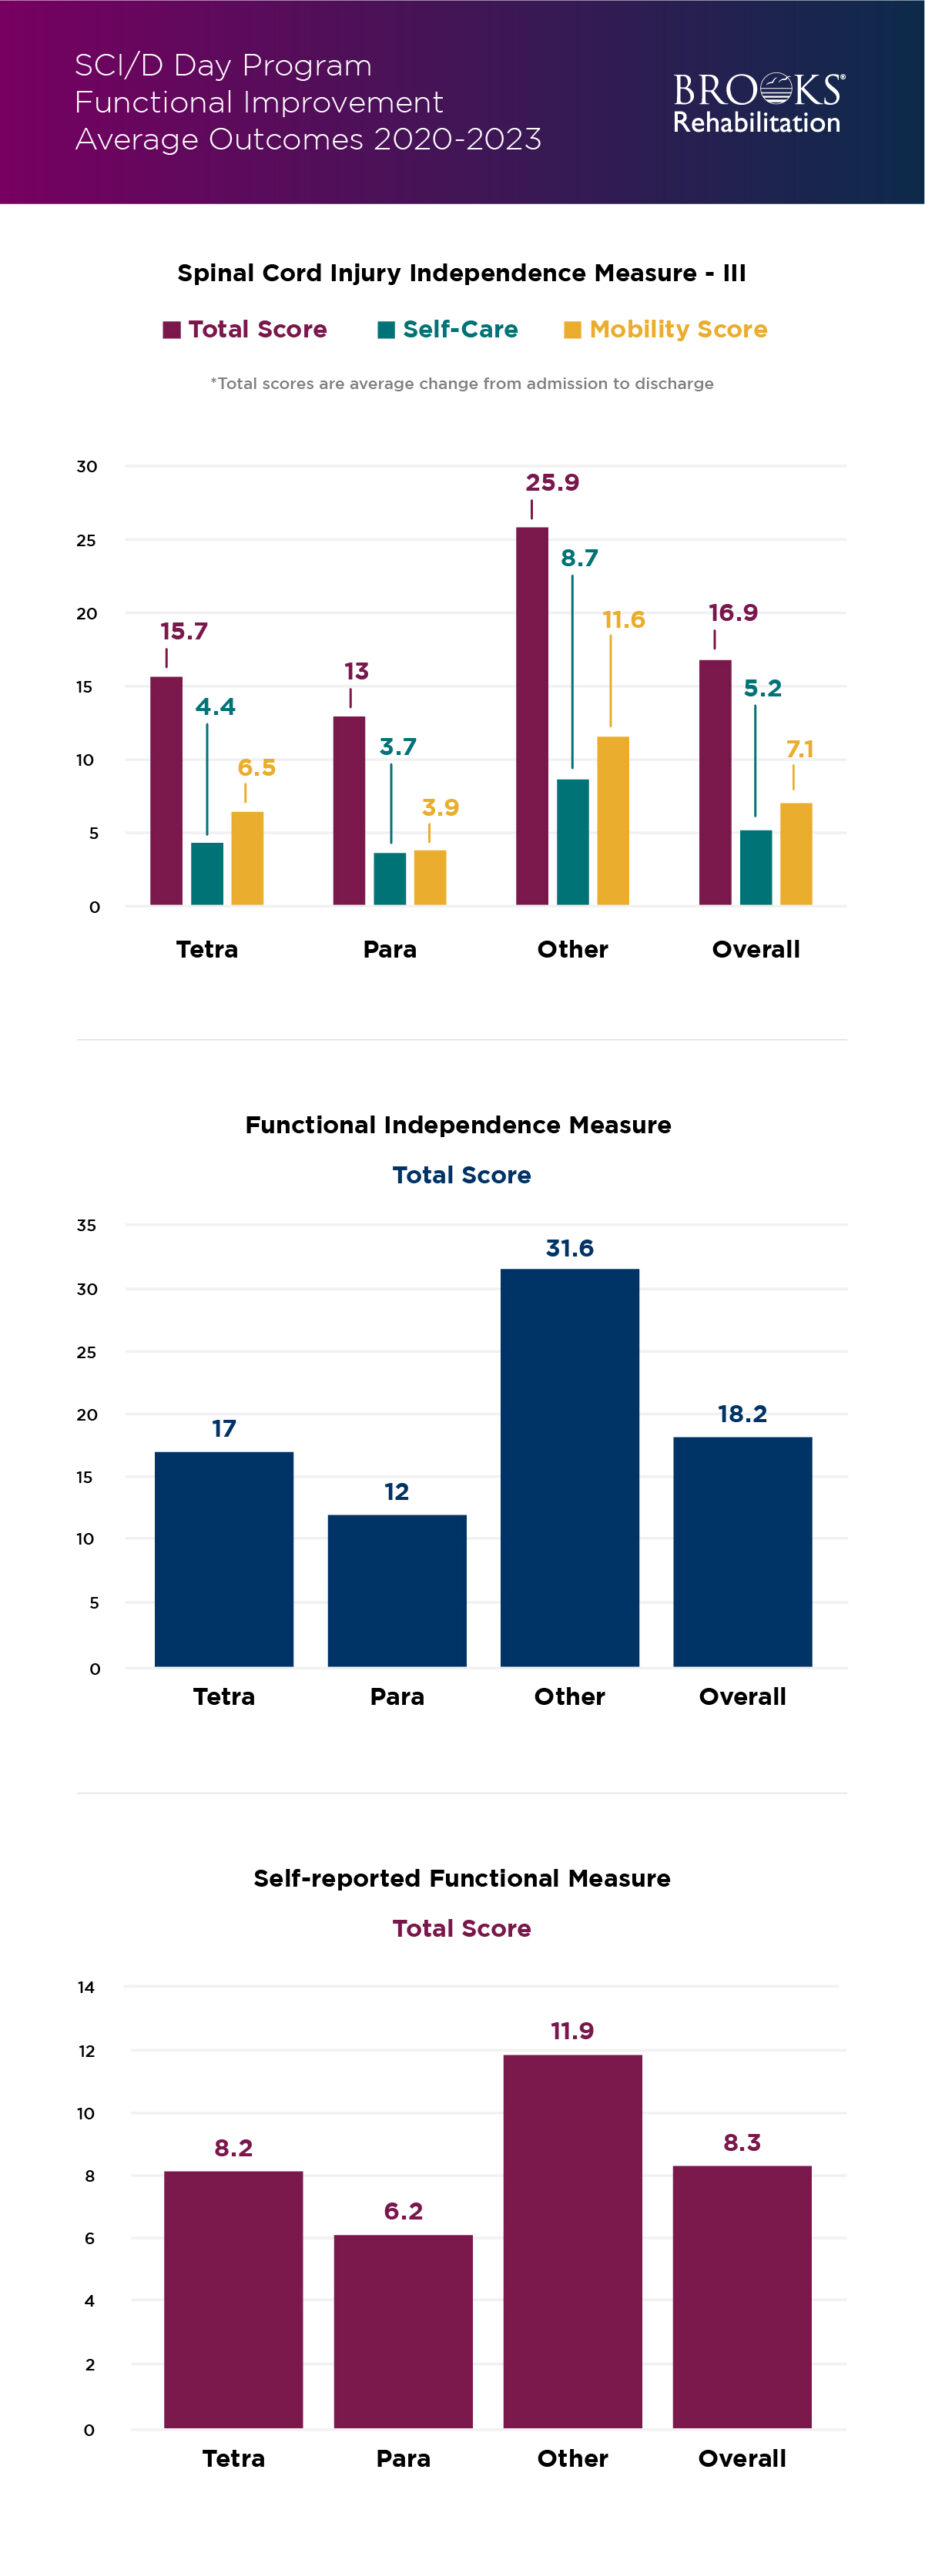 Functional improvement scores for patients in the SCI Day Program at Brooks visualized in bar graphs.